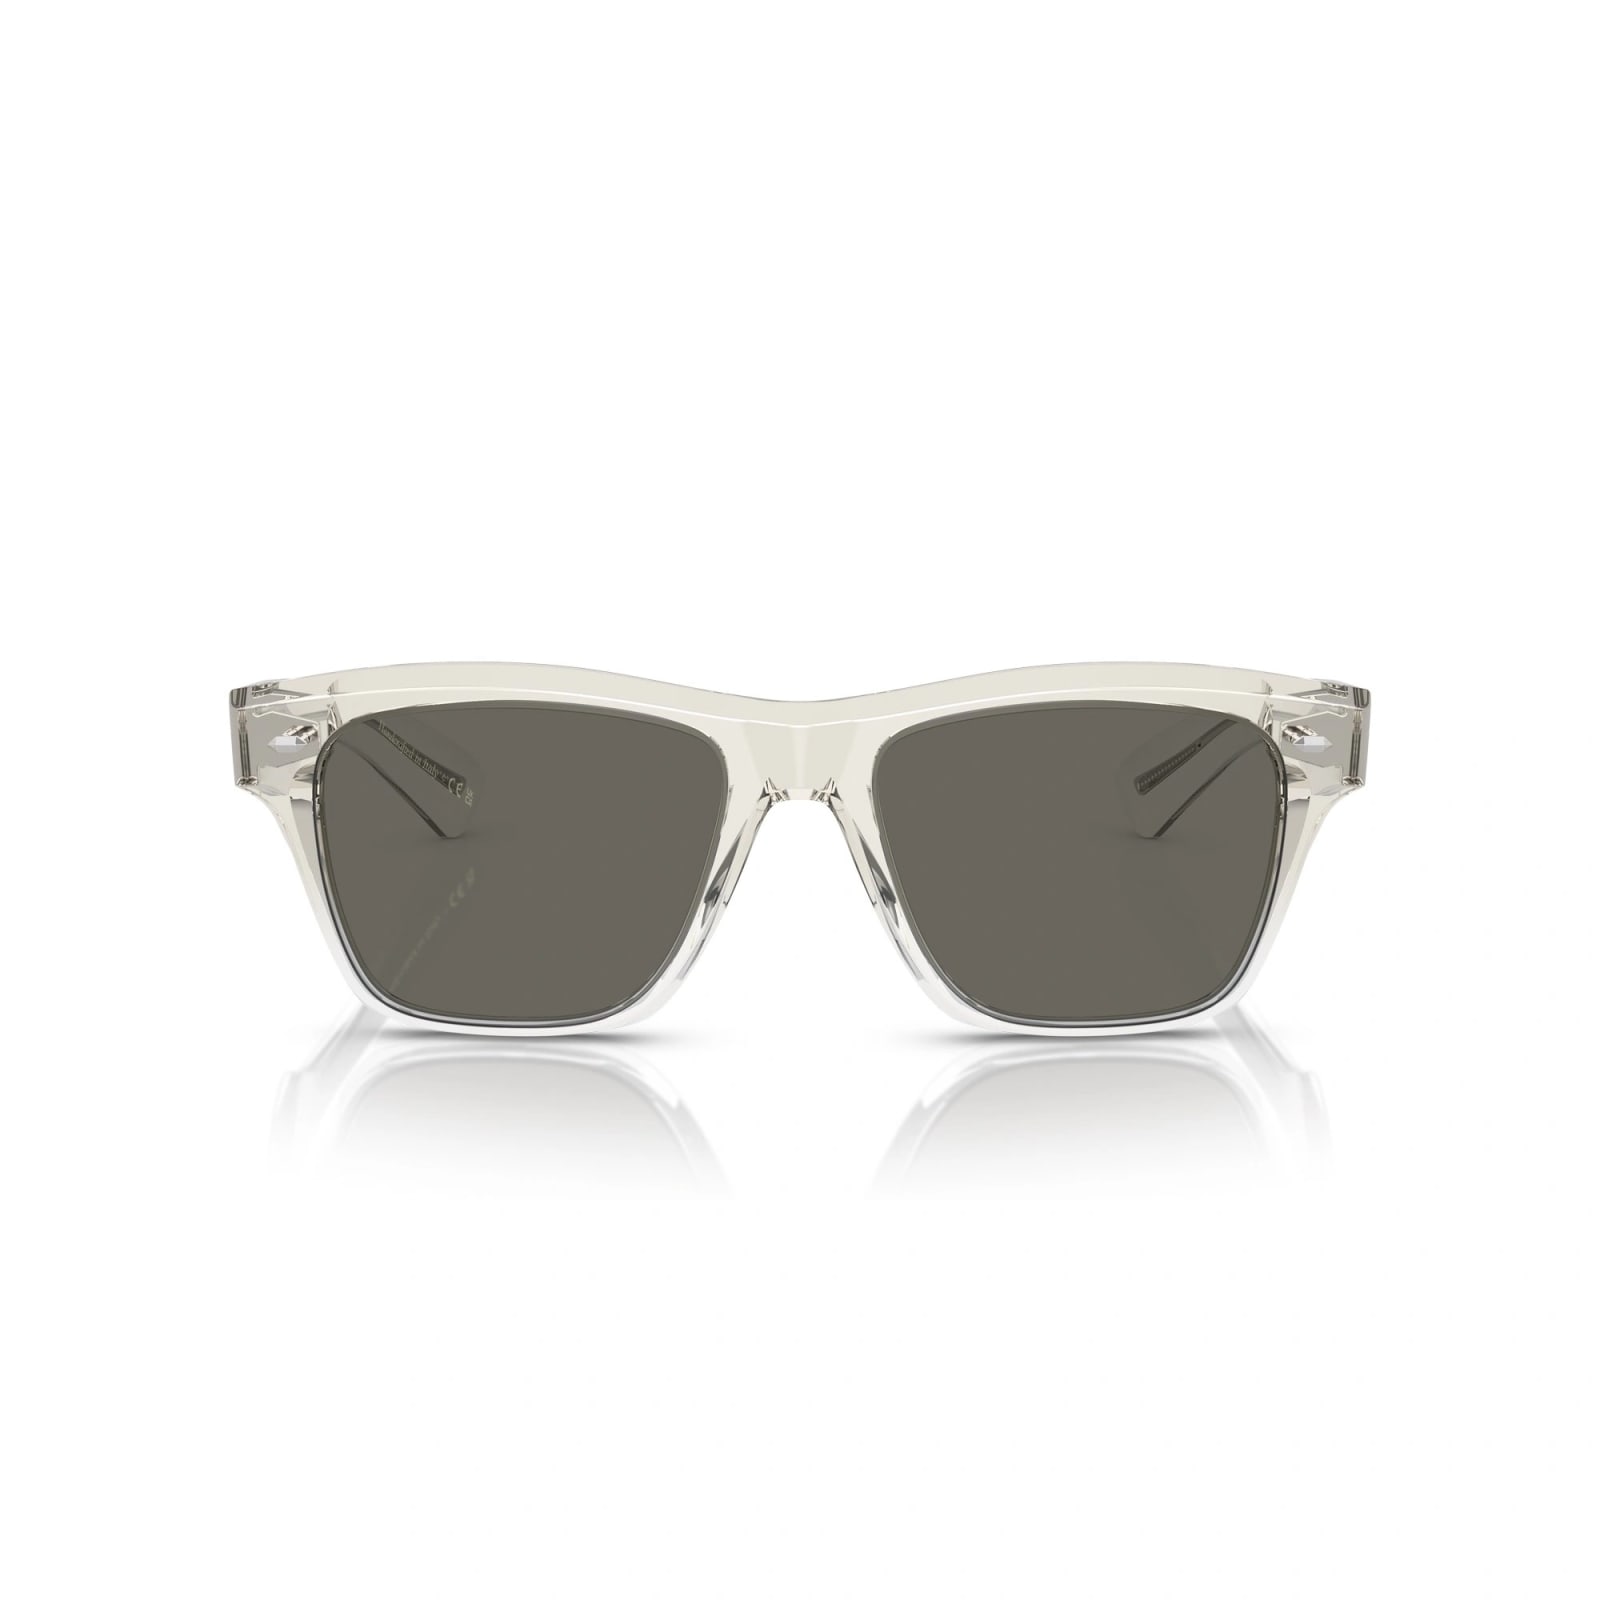 Oliver Peoples Ov5522s 1752r5 Sunglasses In Gray